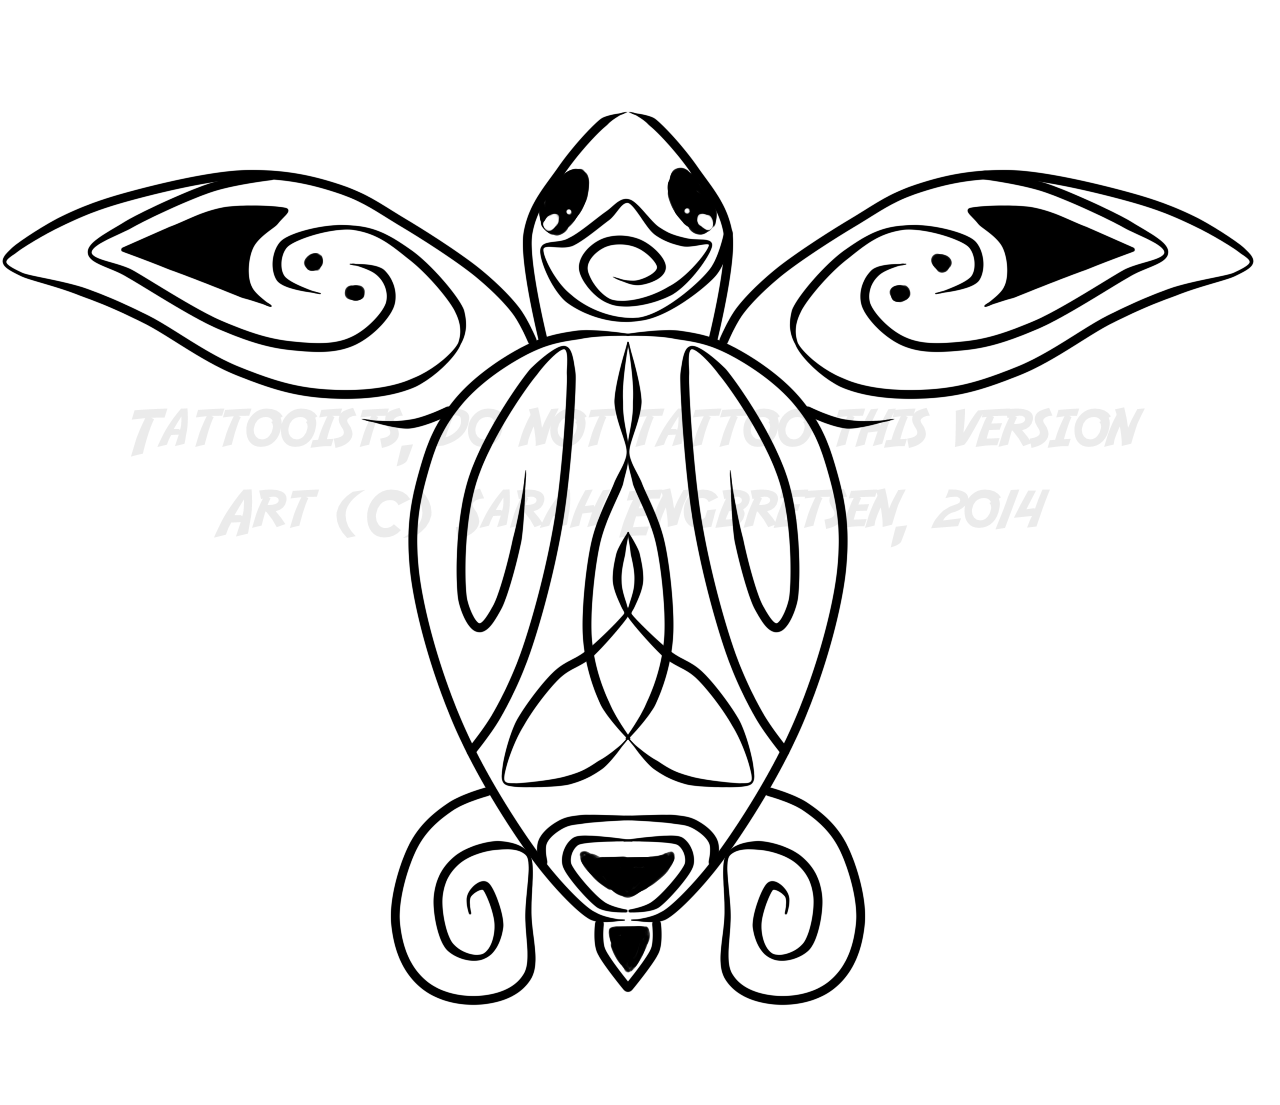 Black Tribal Turtle Tattoo Stencil For Daughter